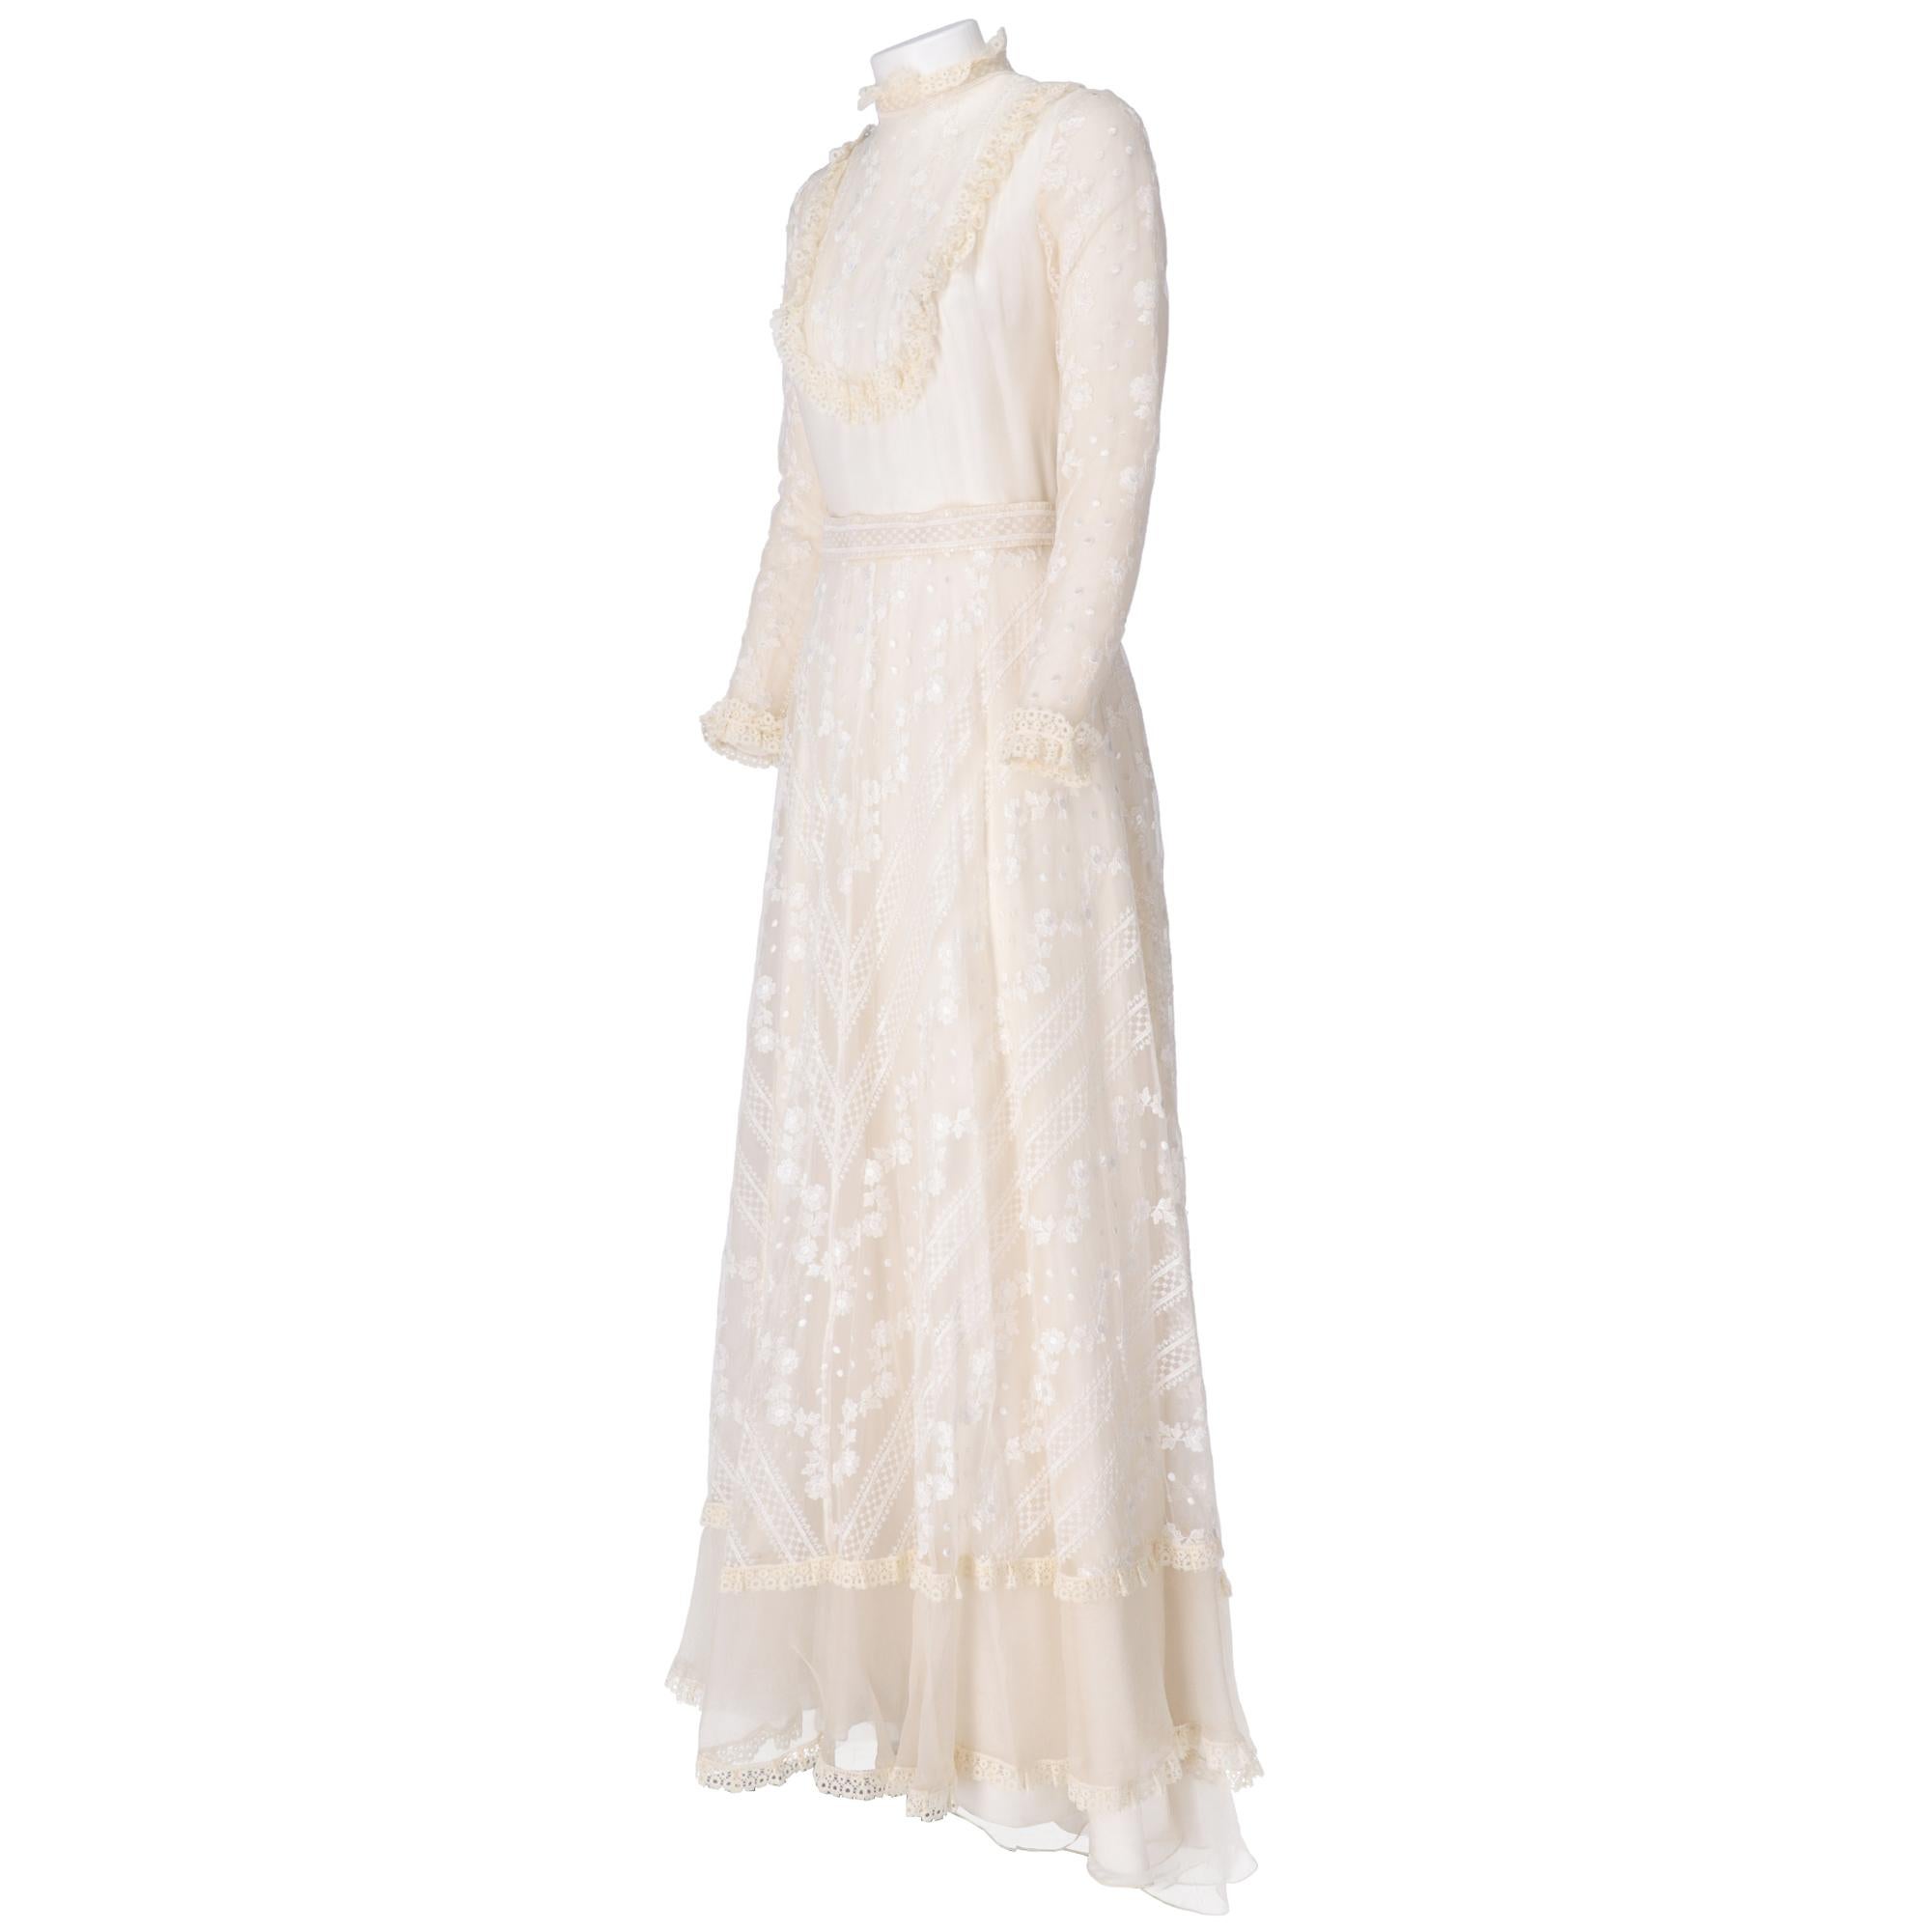 Ivory tailored wedding dress with train, cut at the waist, long layered skirt with white floral embroidery, mock neck in lace, long sleeves with lace on the hem, embroidered band at the waist, zip closure and hooks on the back.

The item has slight